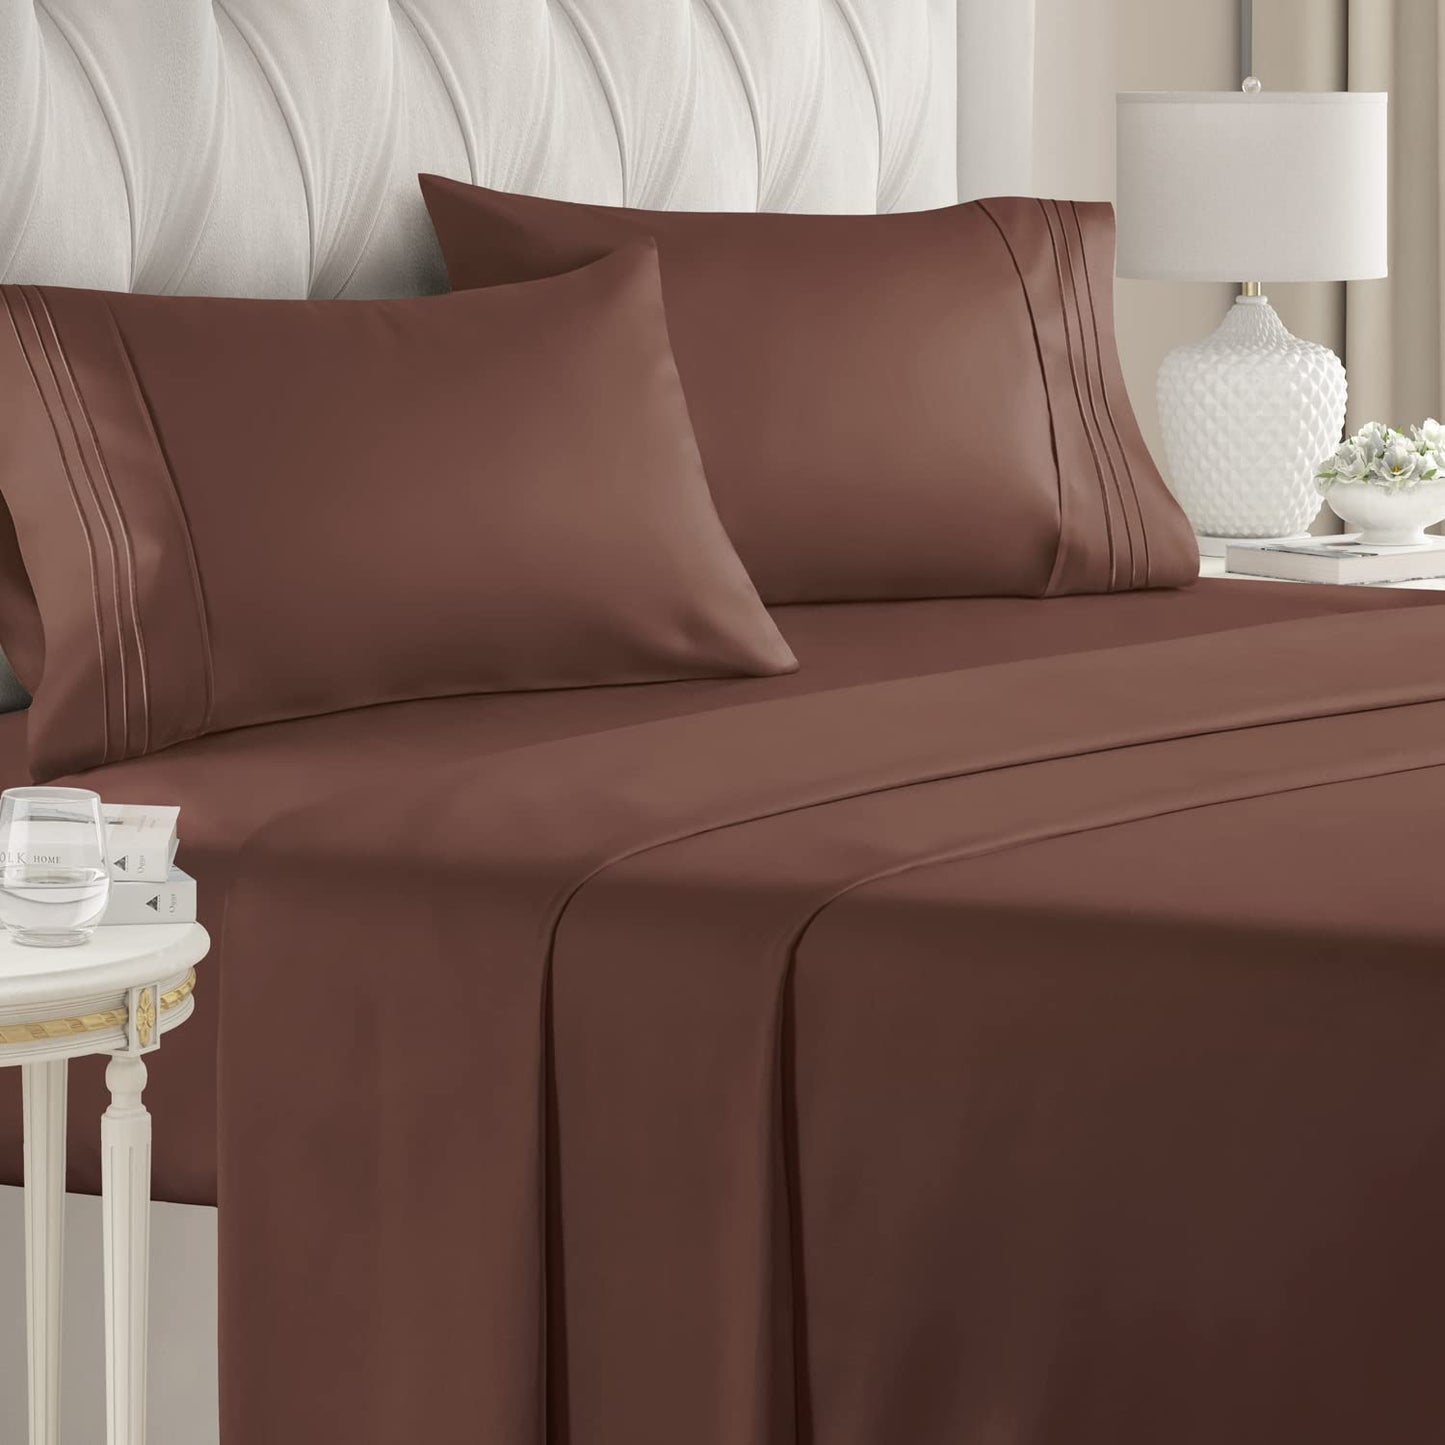 Buy Egyptian Cotton 1000TC Sheet Set King Chocolate Solid at- Egyptianhomelinens.com